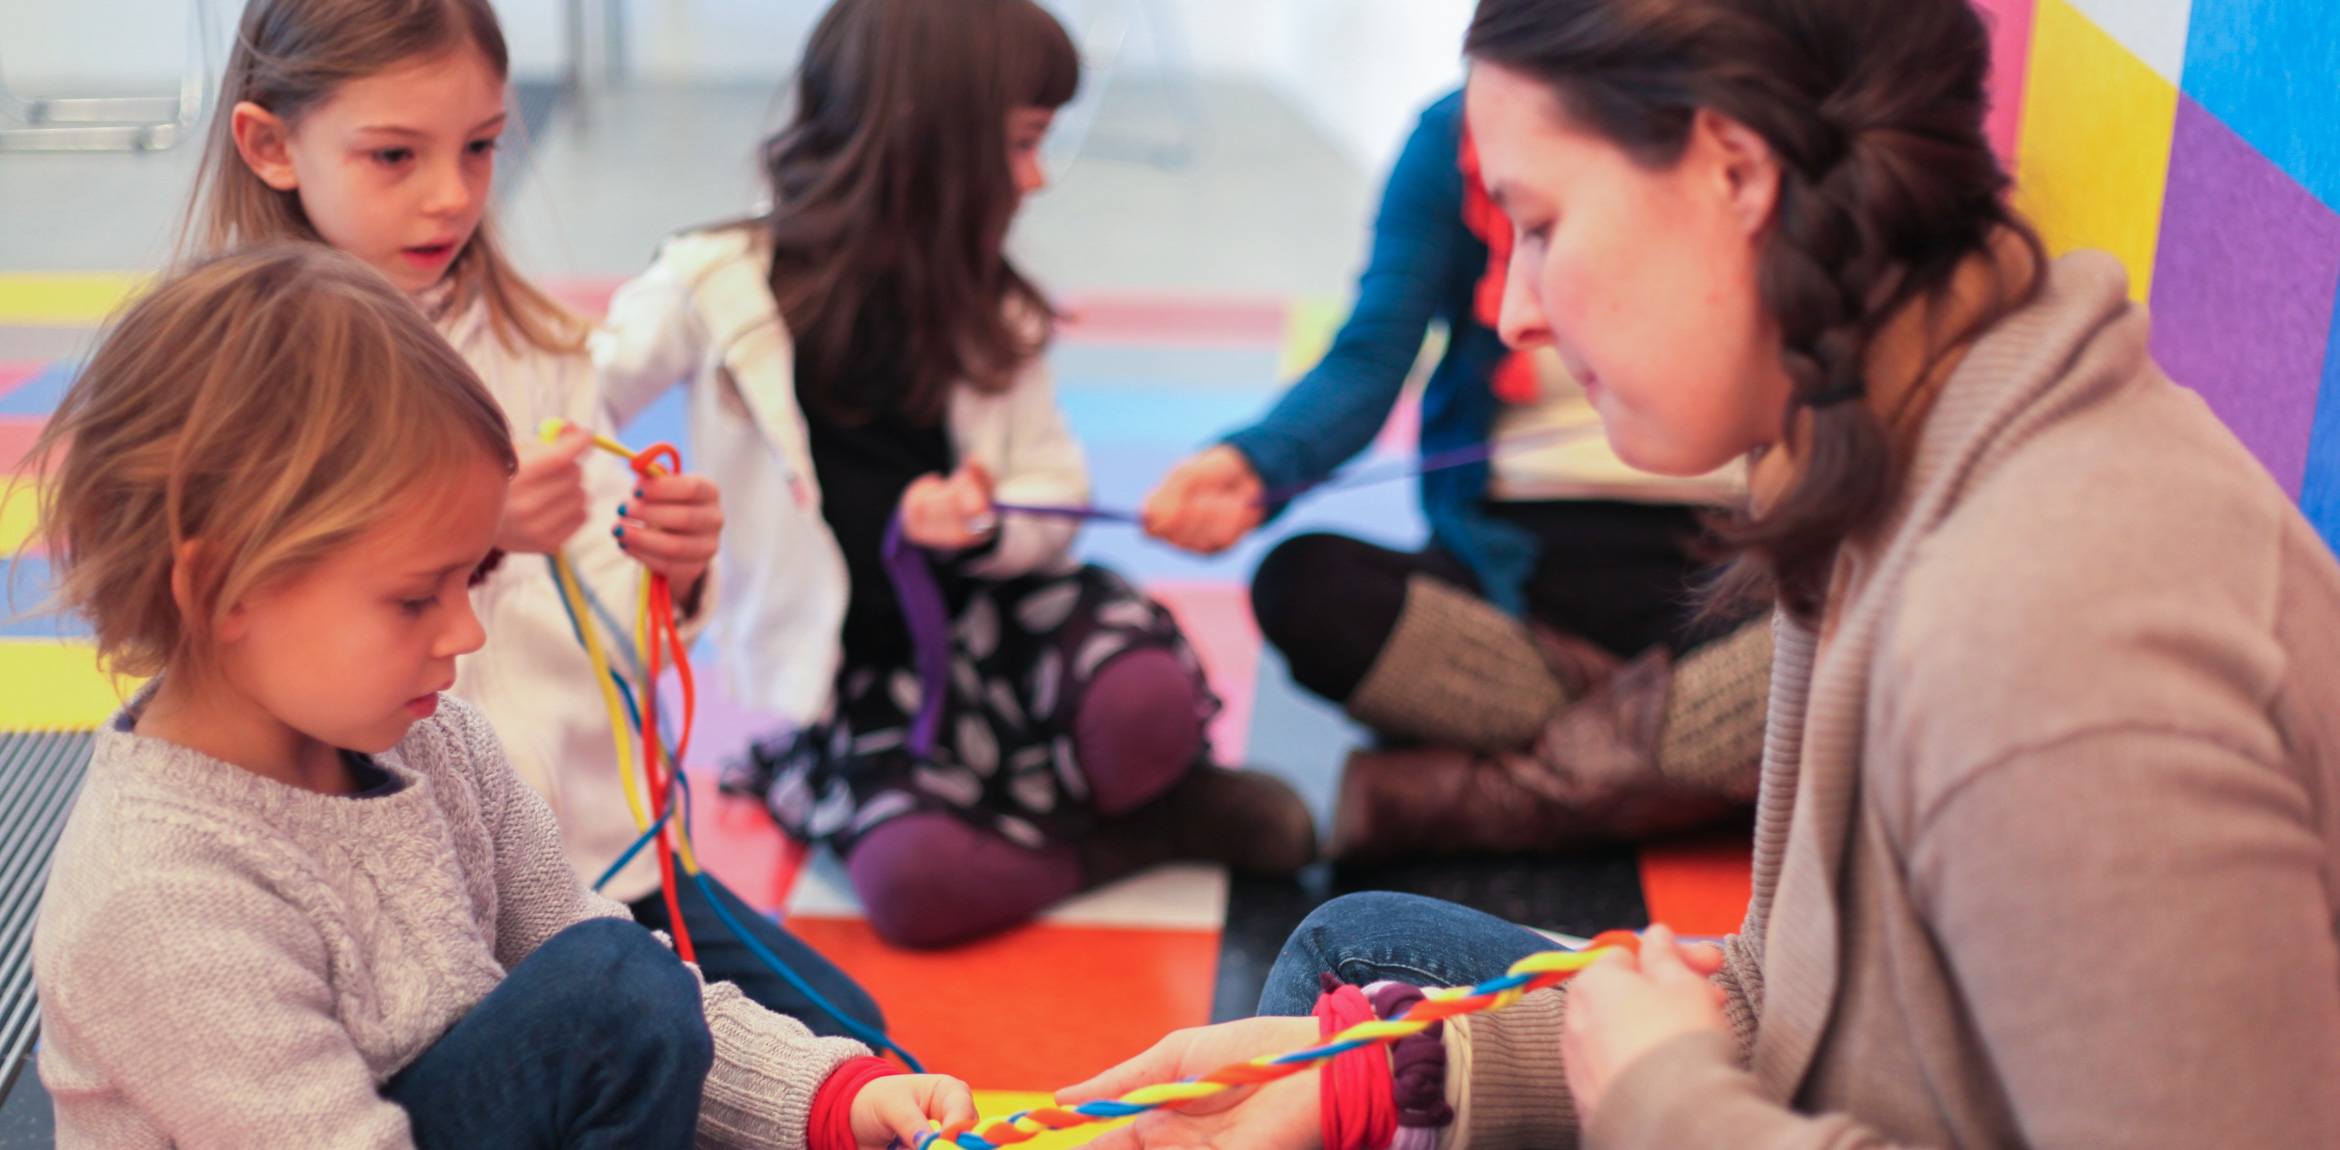 Visitors and their children braid colored ropes together, sitting against David Scanavino's installation "Candy Crush."